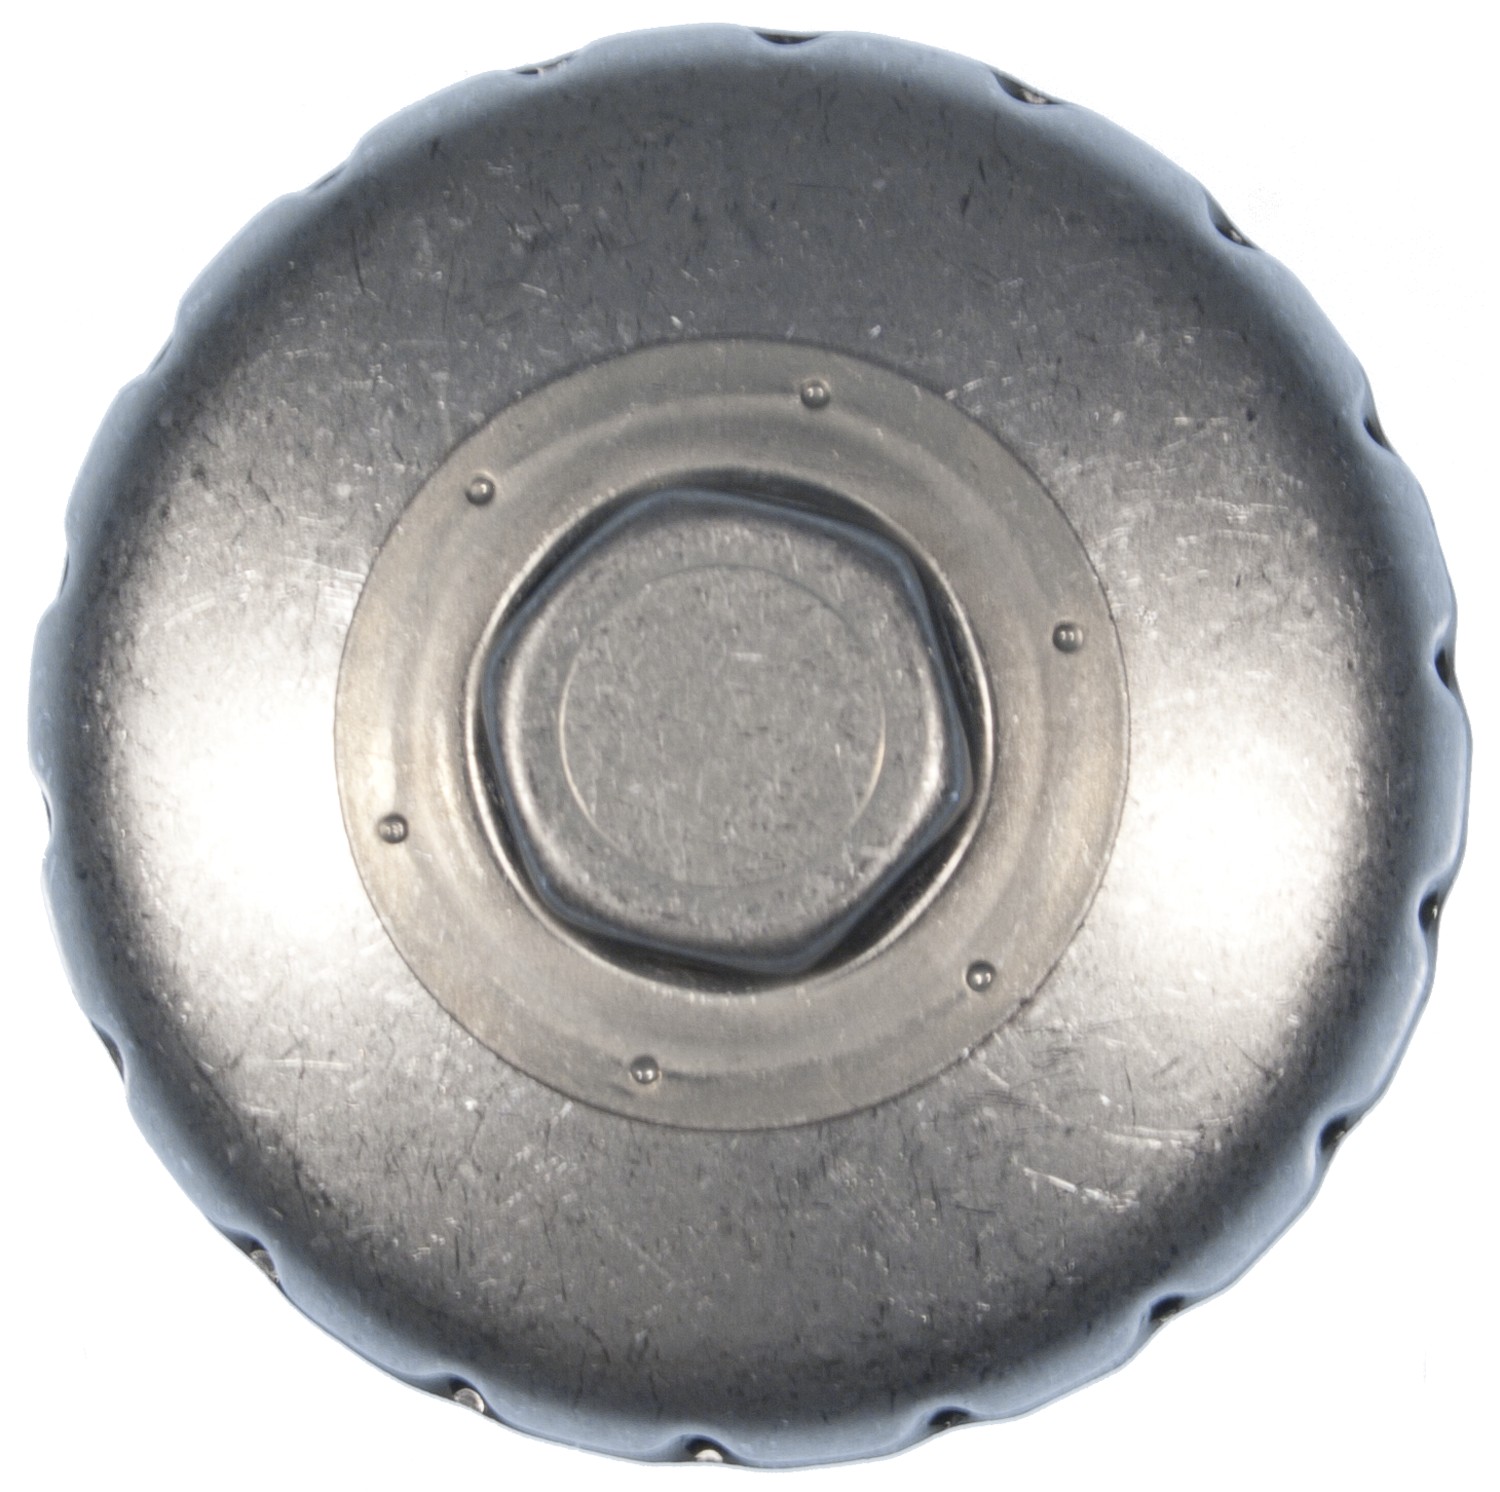 OCS3_MAHLE Oil Filter Wrench